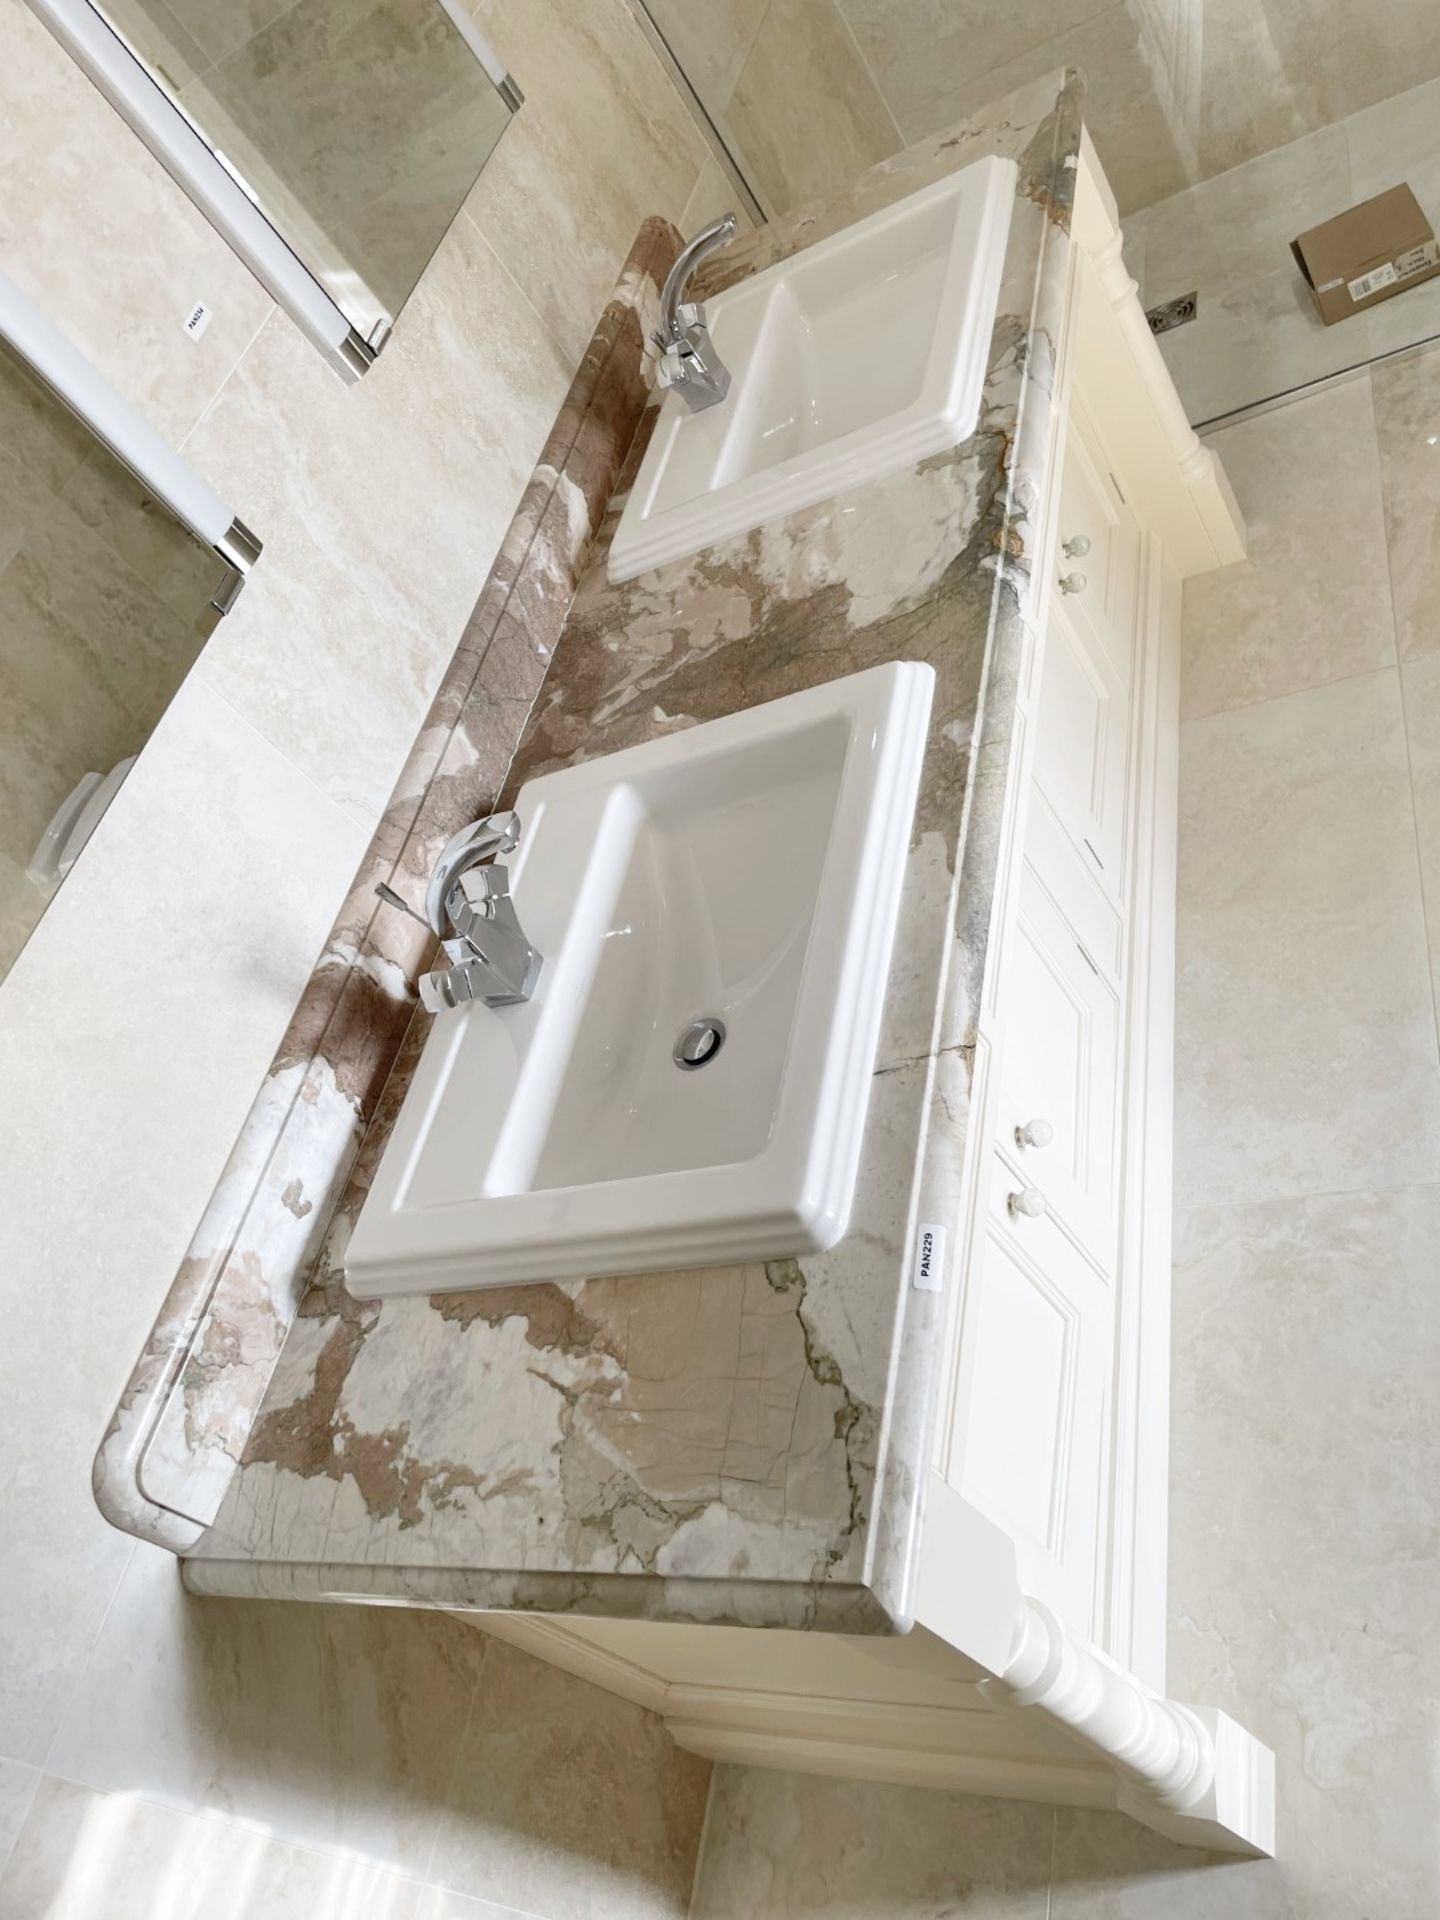 1 x Bespoke Marble-topped Solid Wood Double Vanity Unit with 2 x Villeroy & Boch Basins + Taps - Image 6 of 33